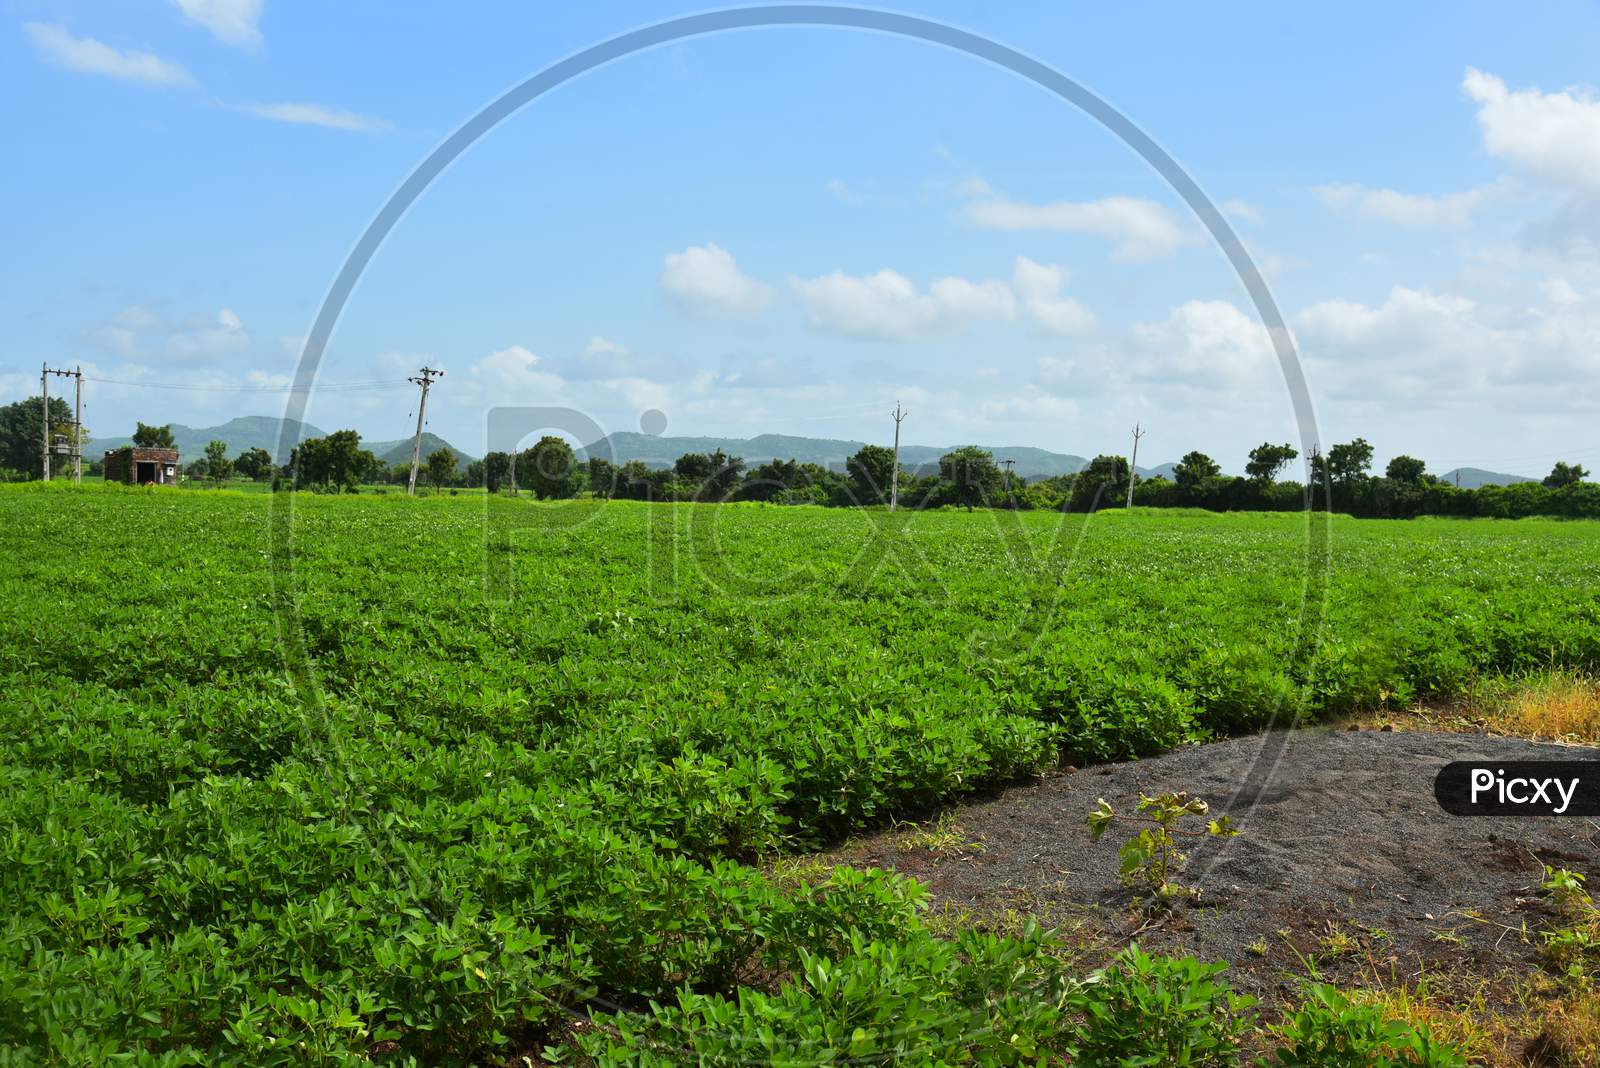 Agriculture, Peanut Field And Grass Stock Image Background .